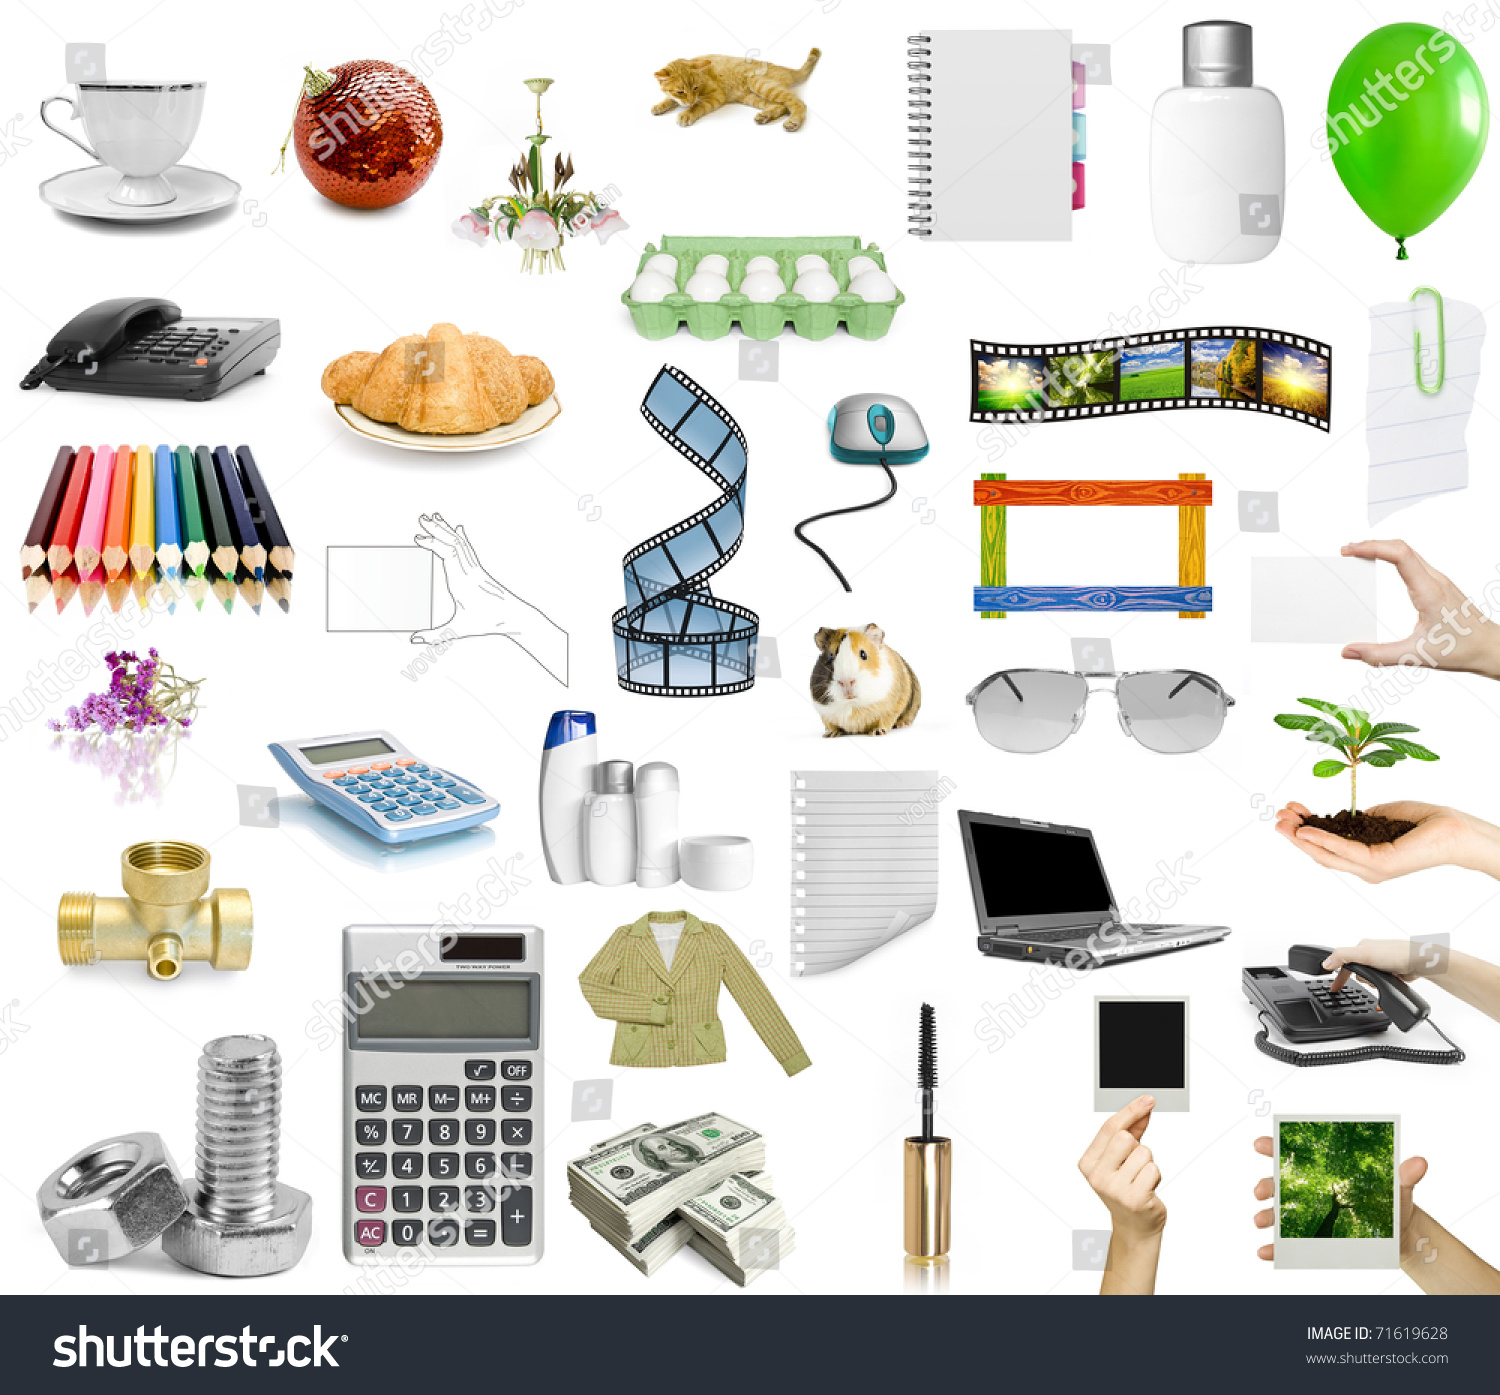 Isolated Objects On White Background Stock Photo 71619628 - Shutterstock